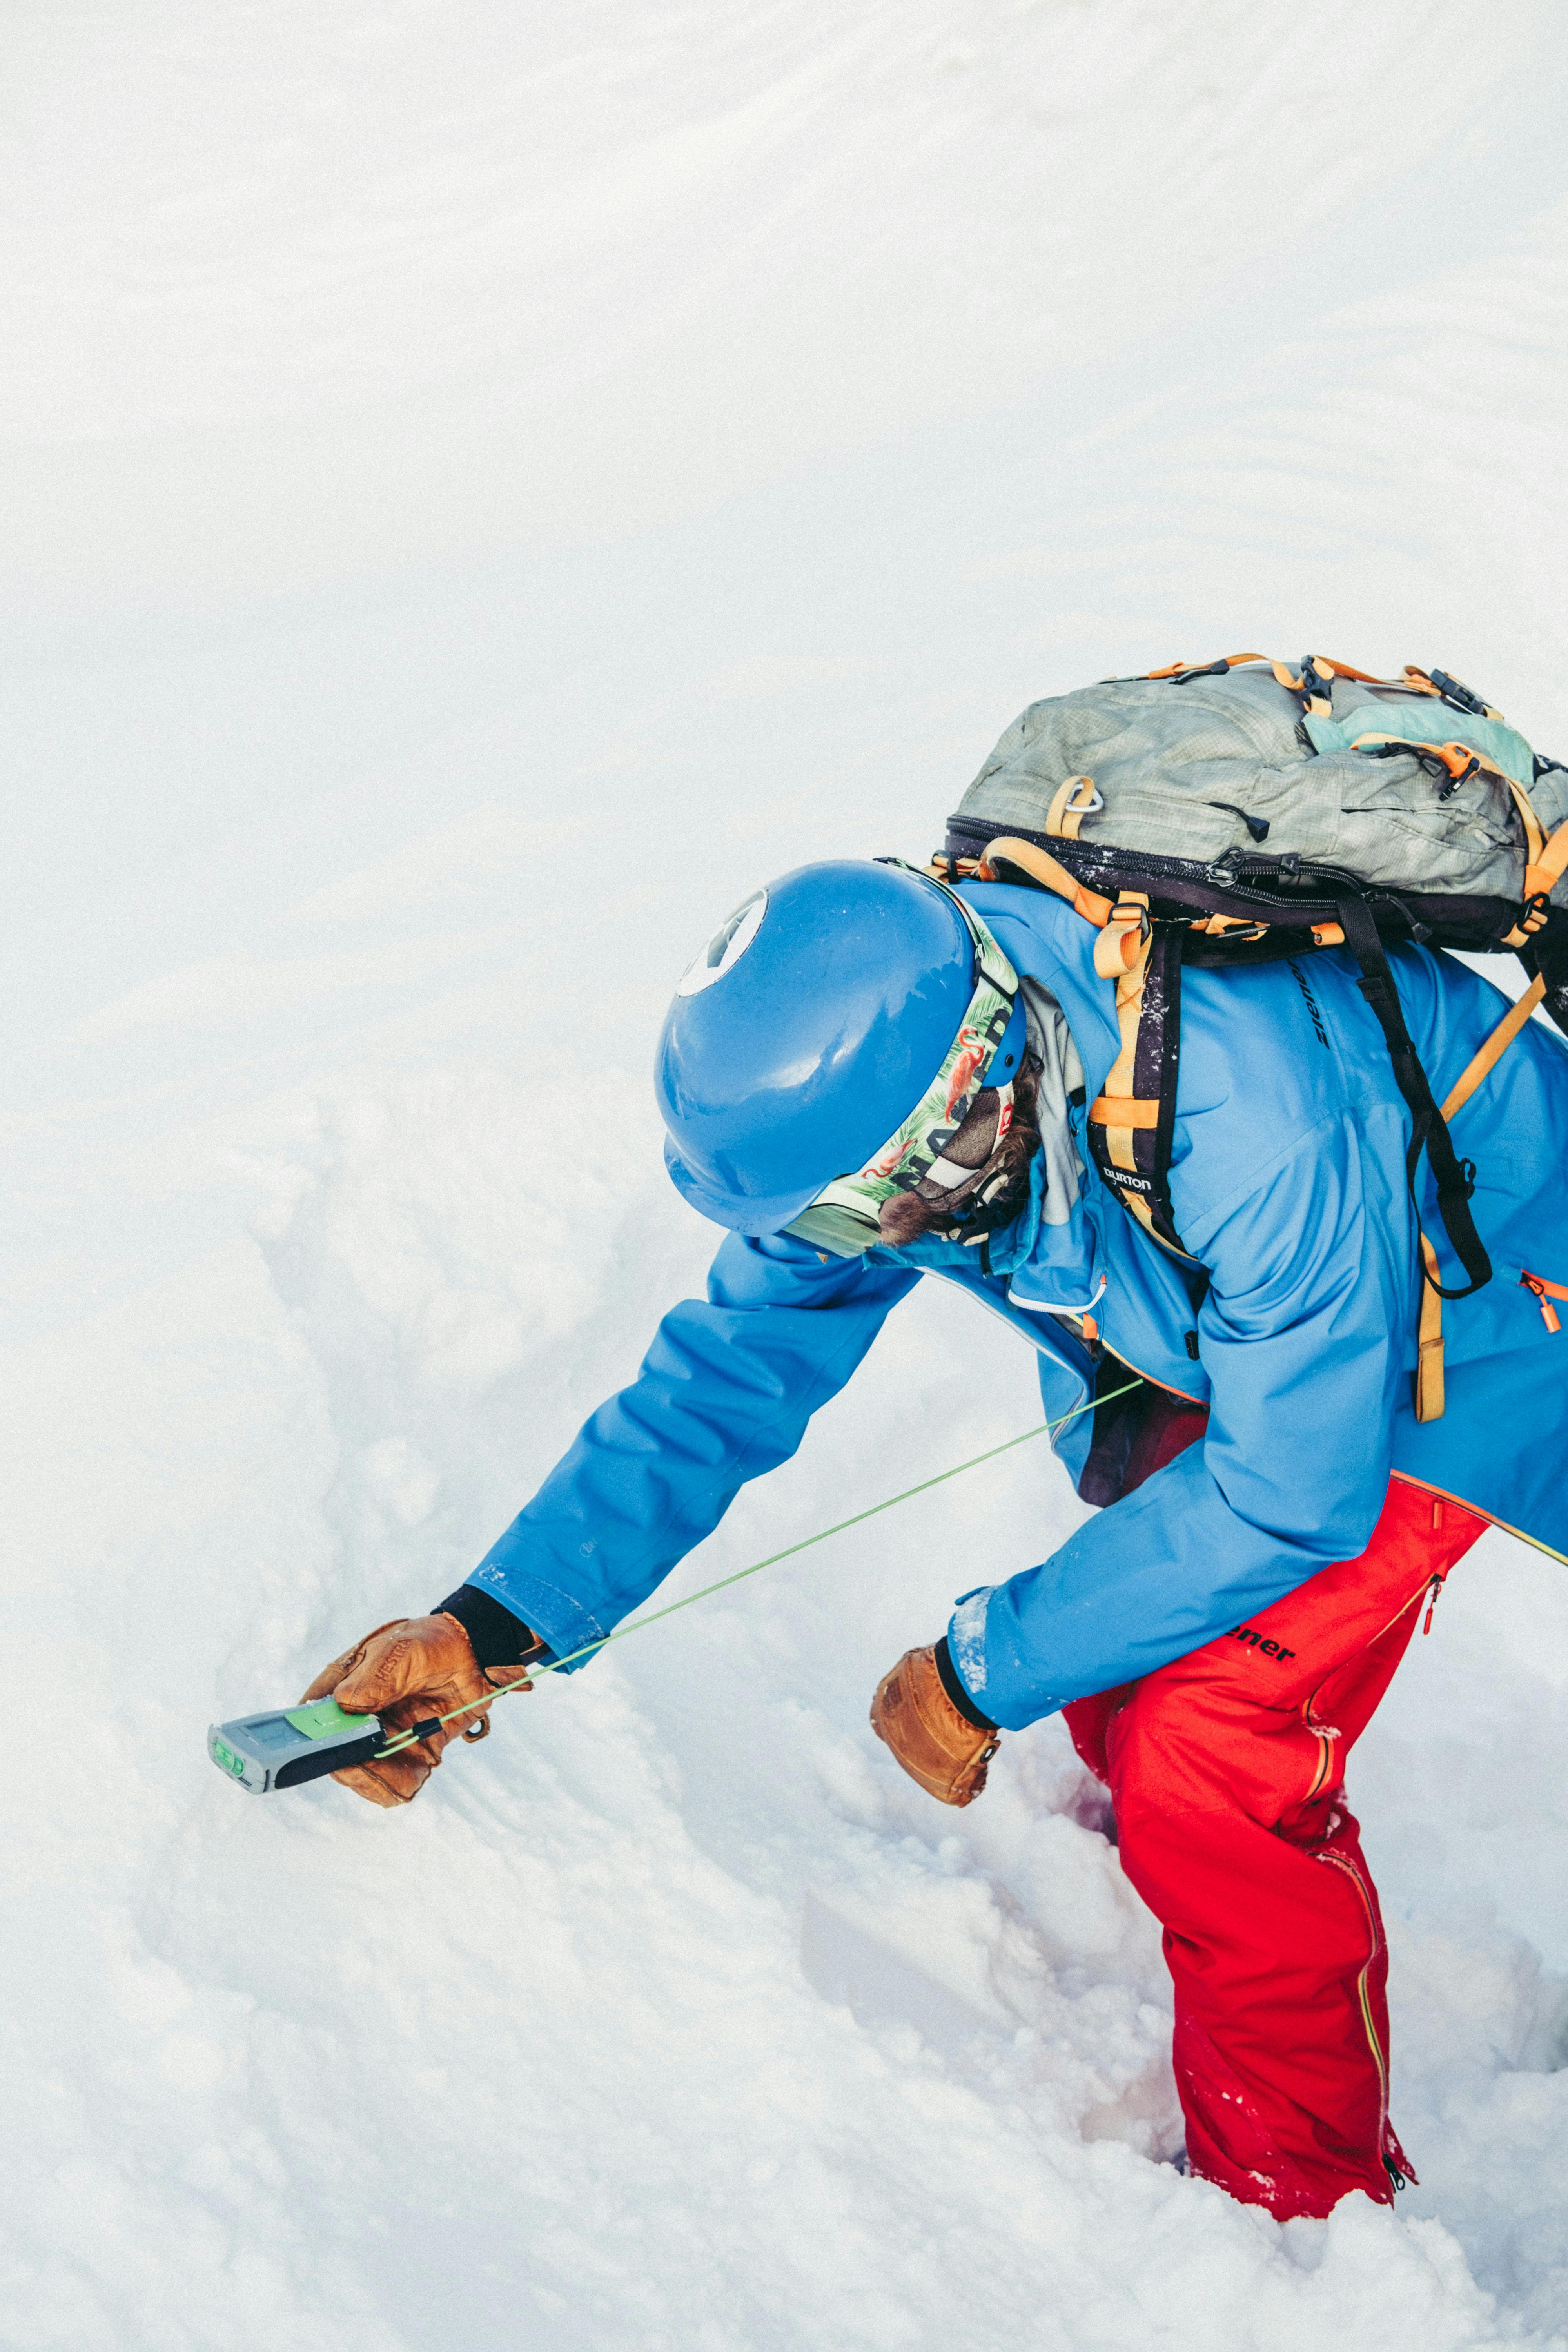 A person in a blue jacket and red pants uses an avalanche beacon